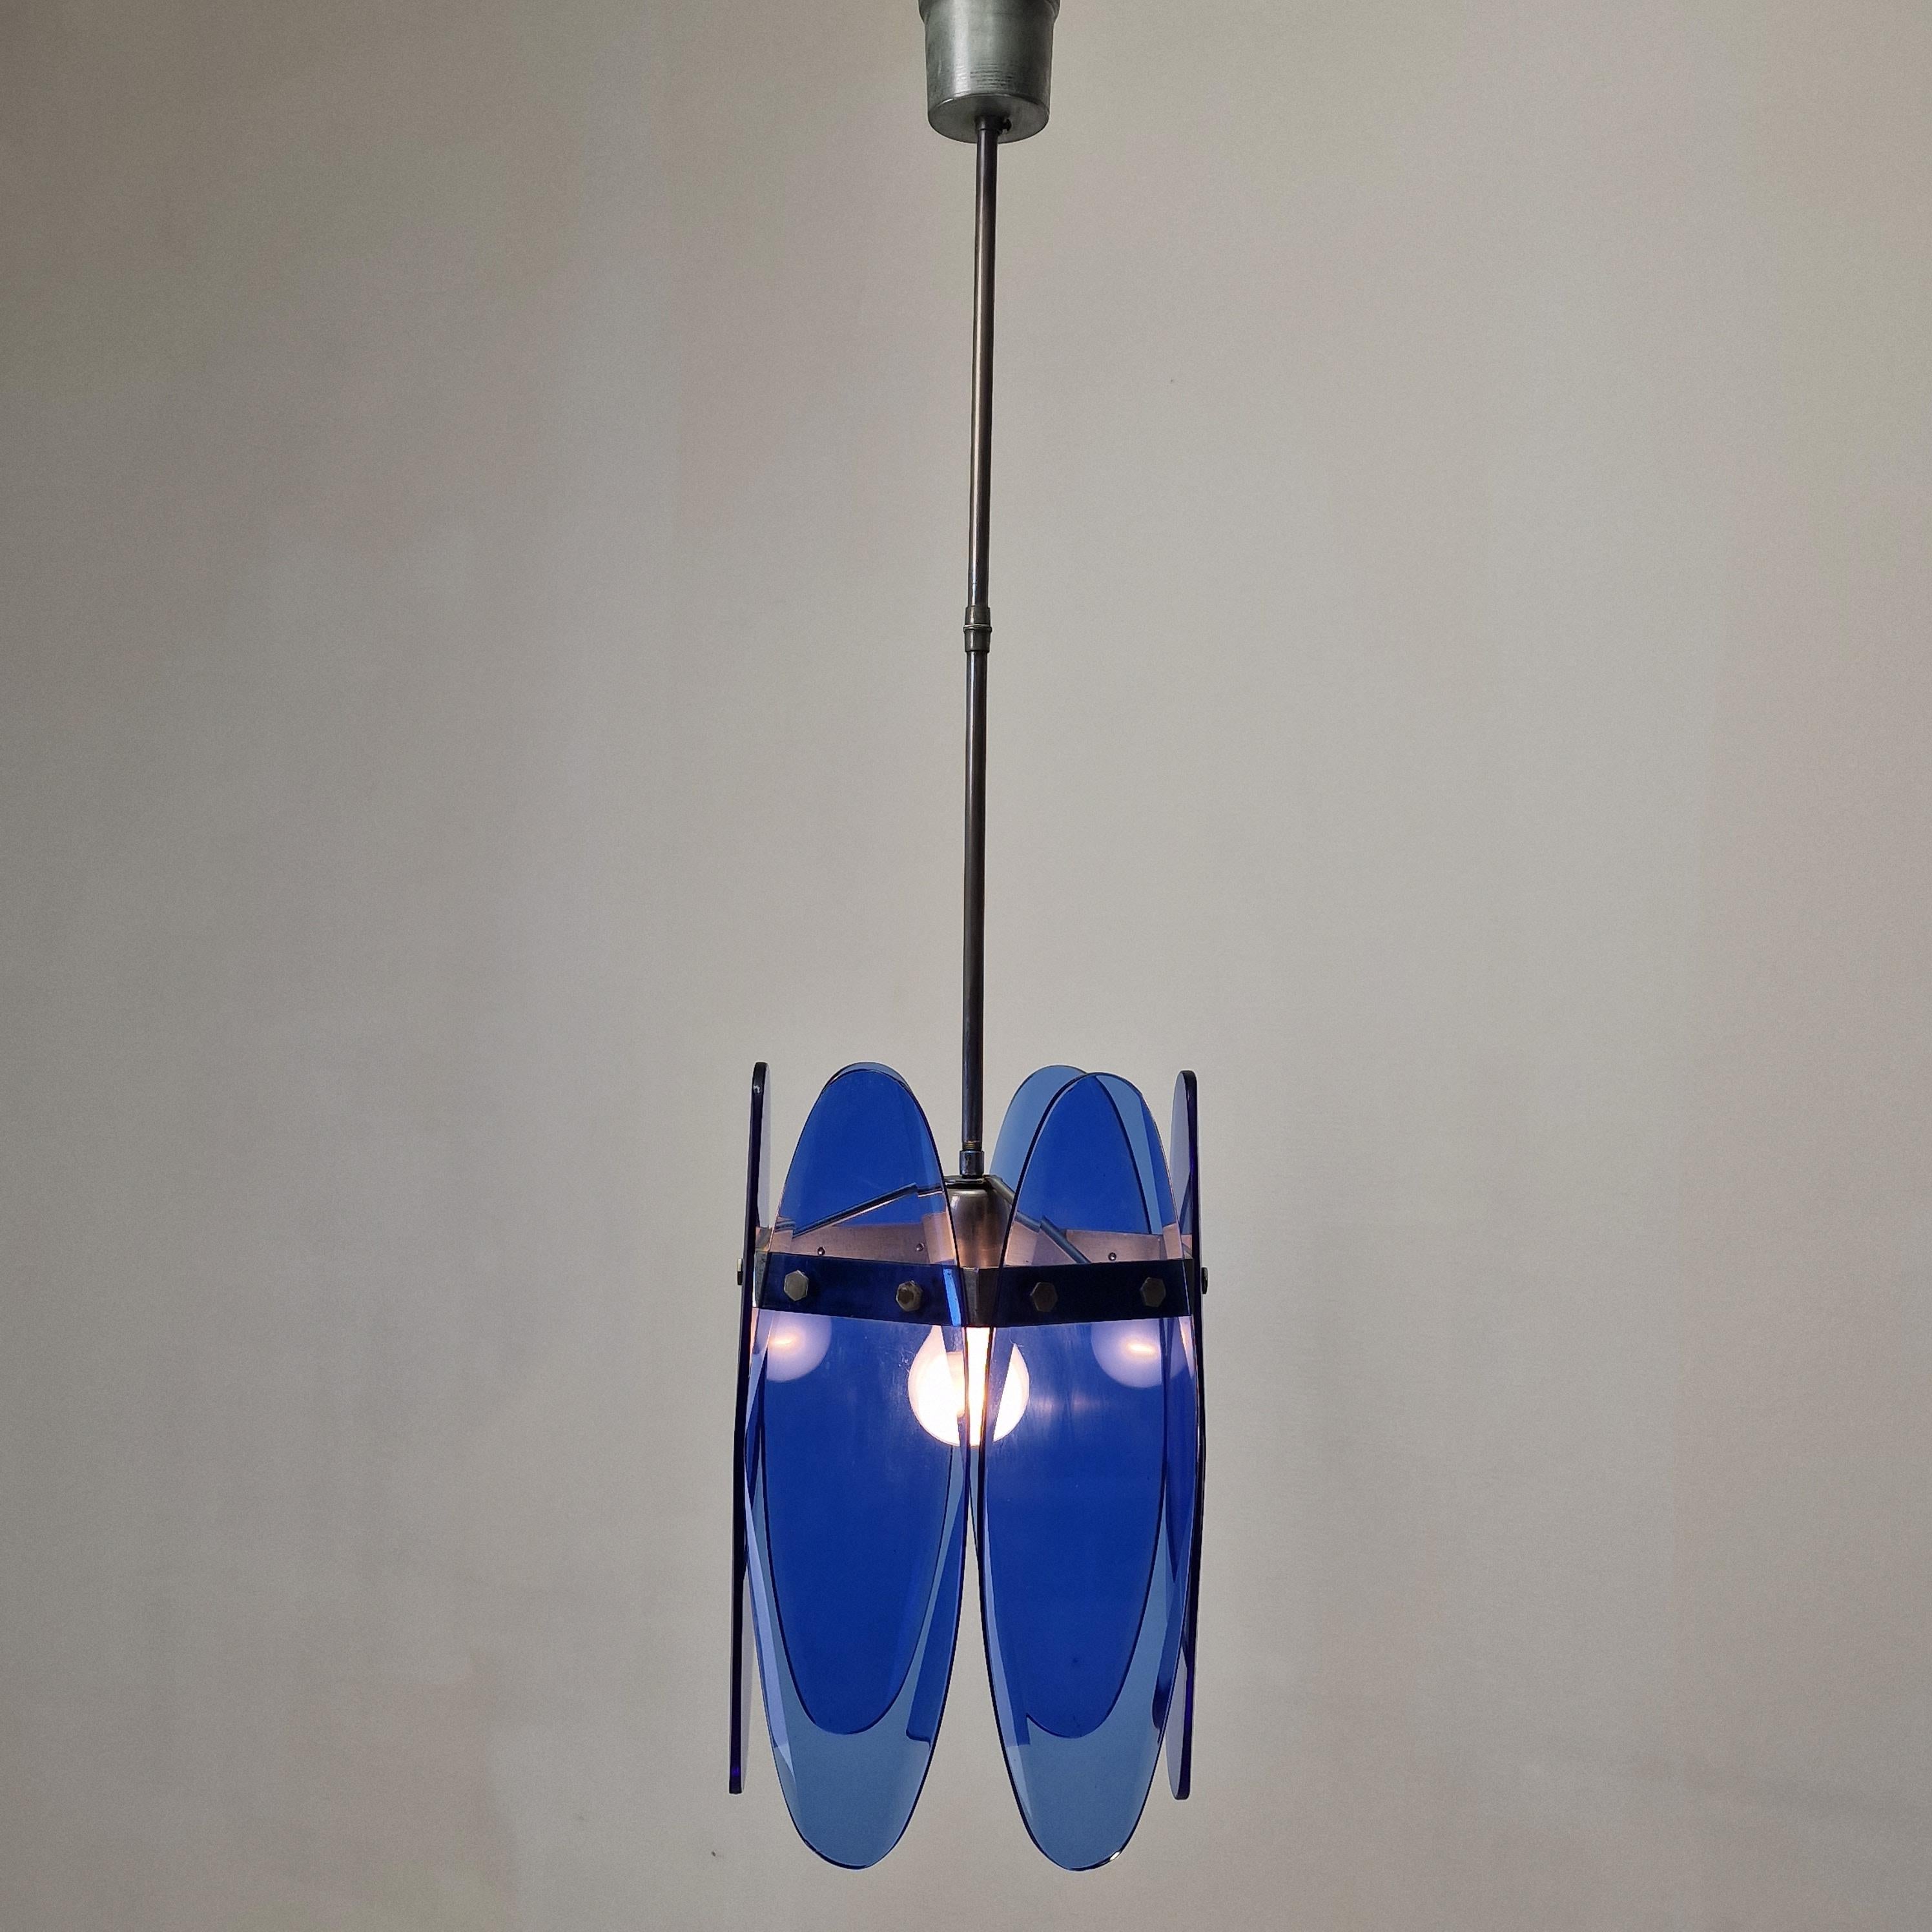 Hand-Crafted Mid-Century Modern Blue Glass Chandelier or Pendant by Veca, Italy 1970's For Sale